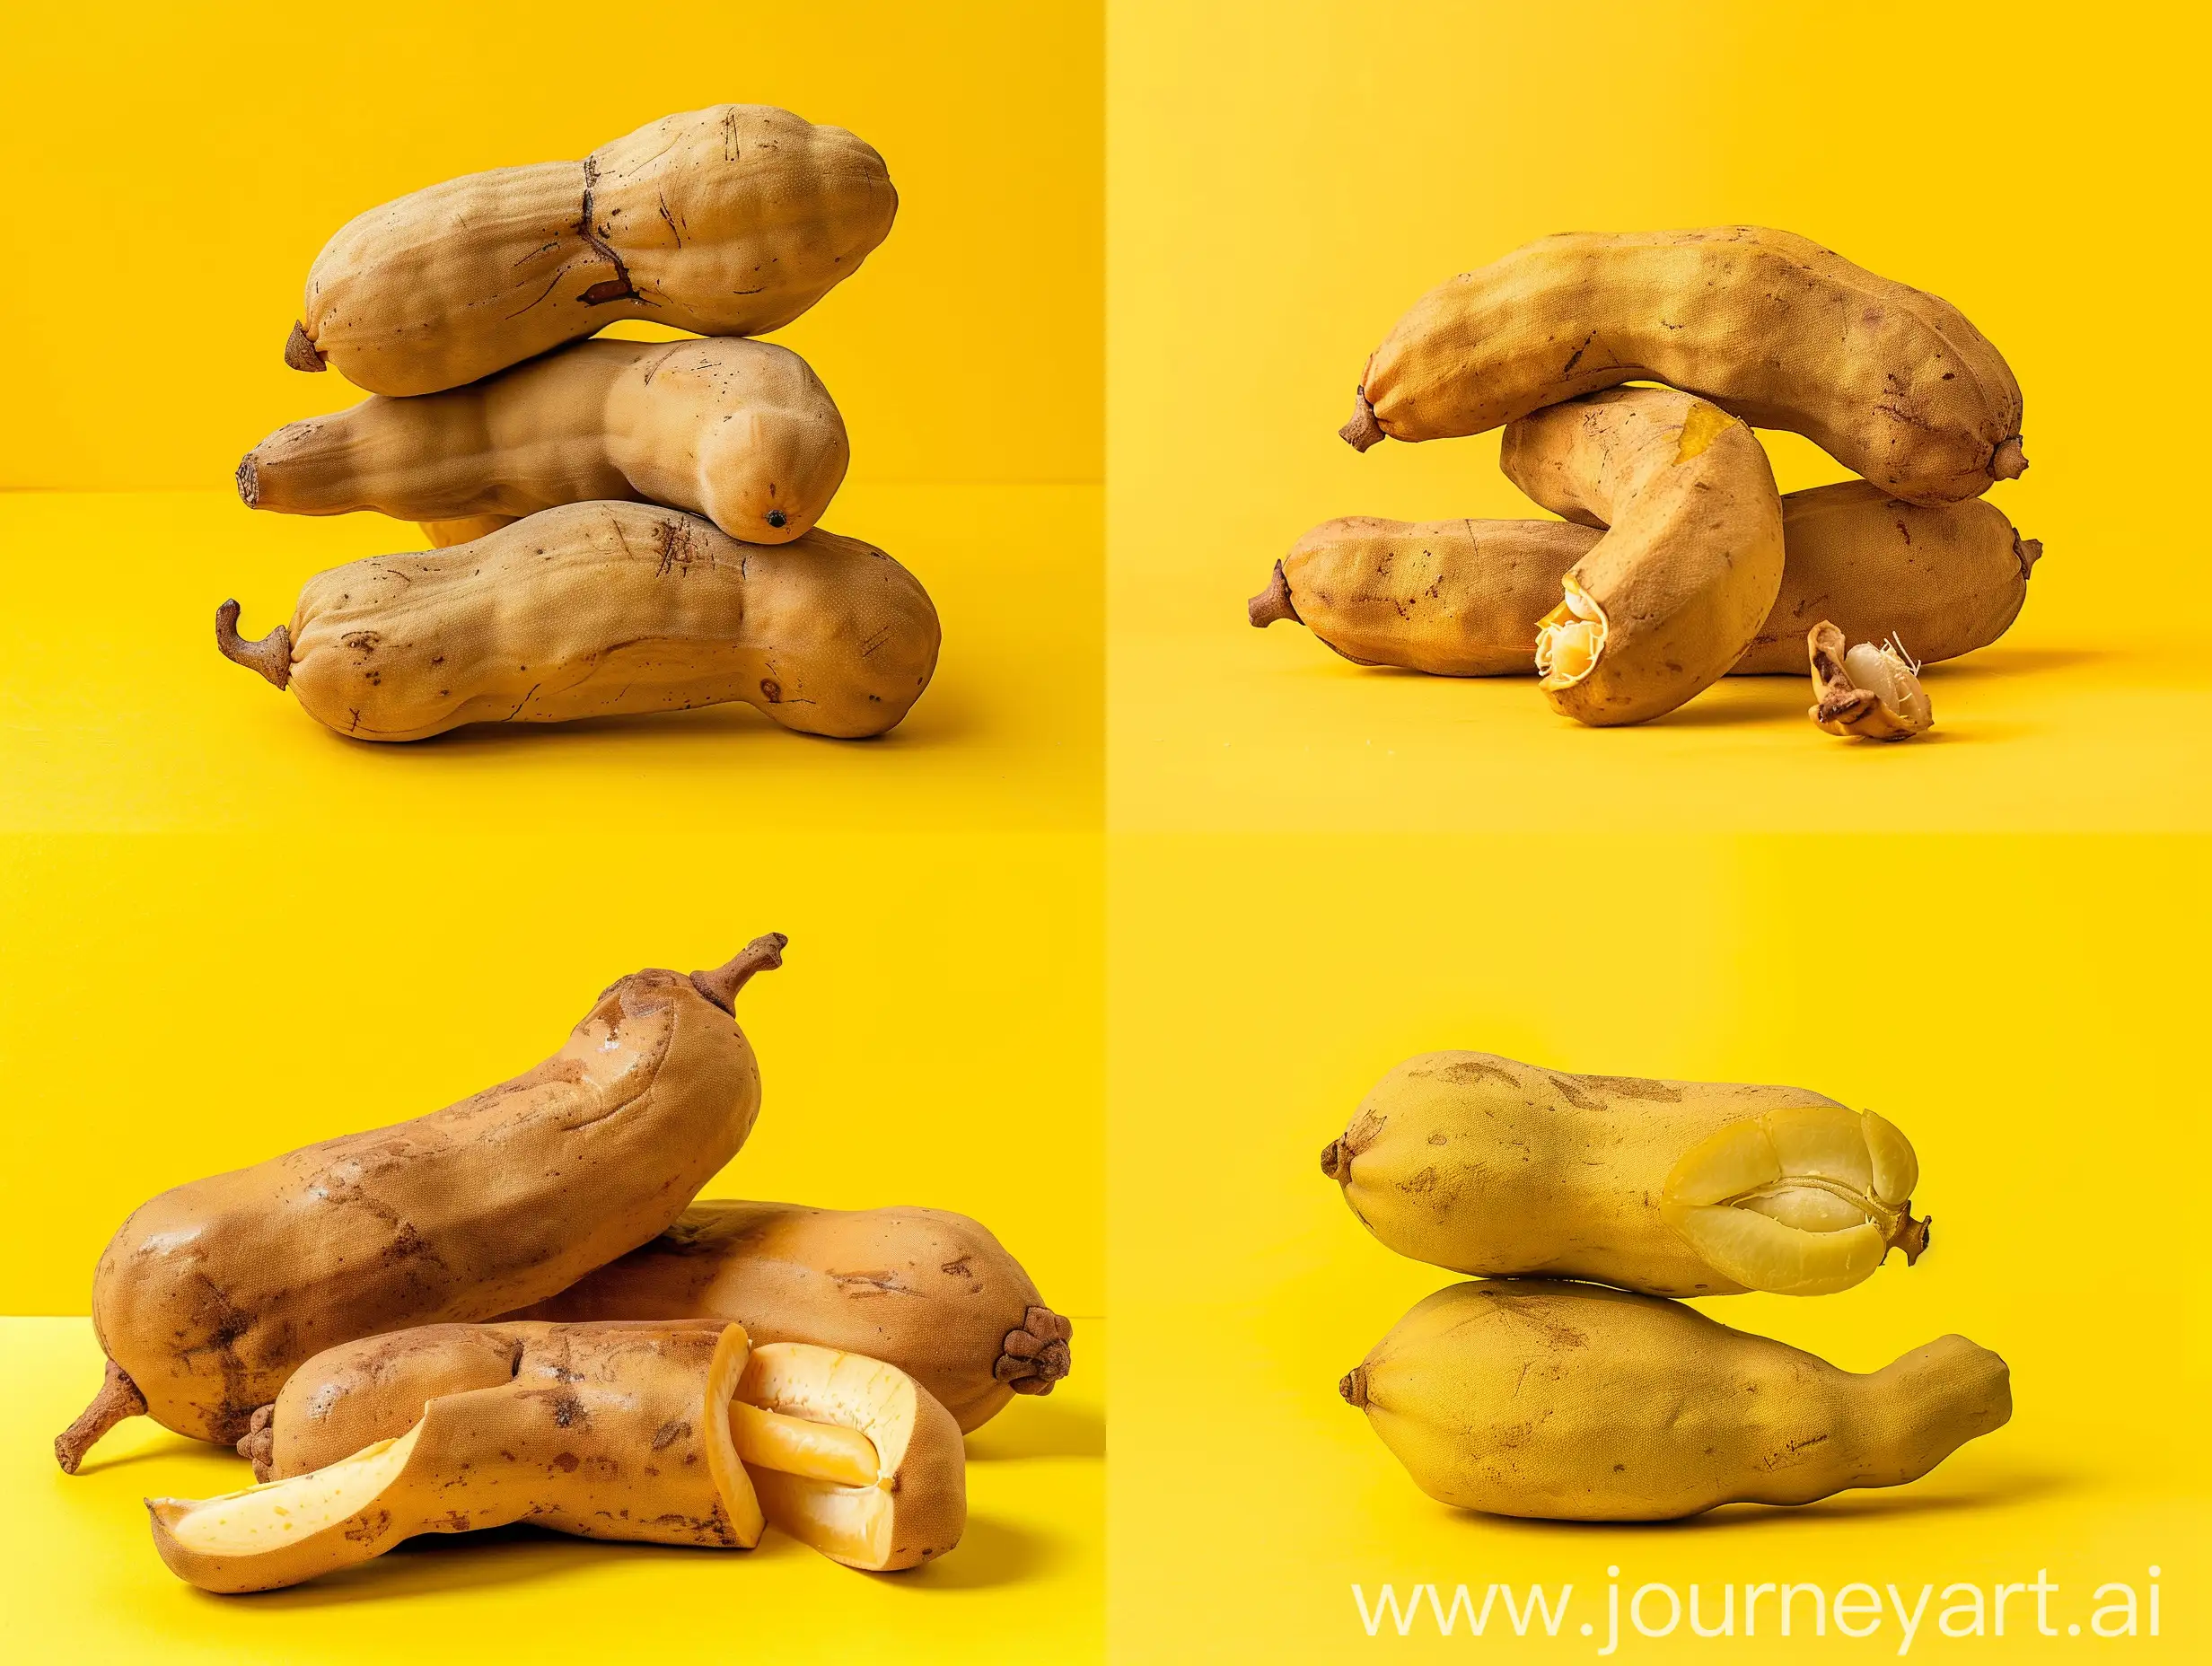 Studio photography with bright yellow background of tamarind